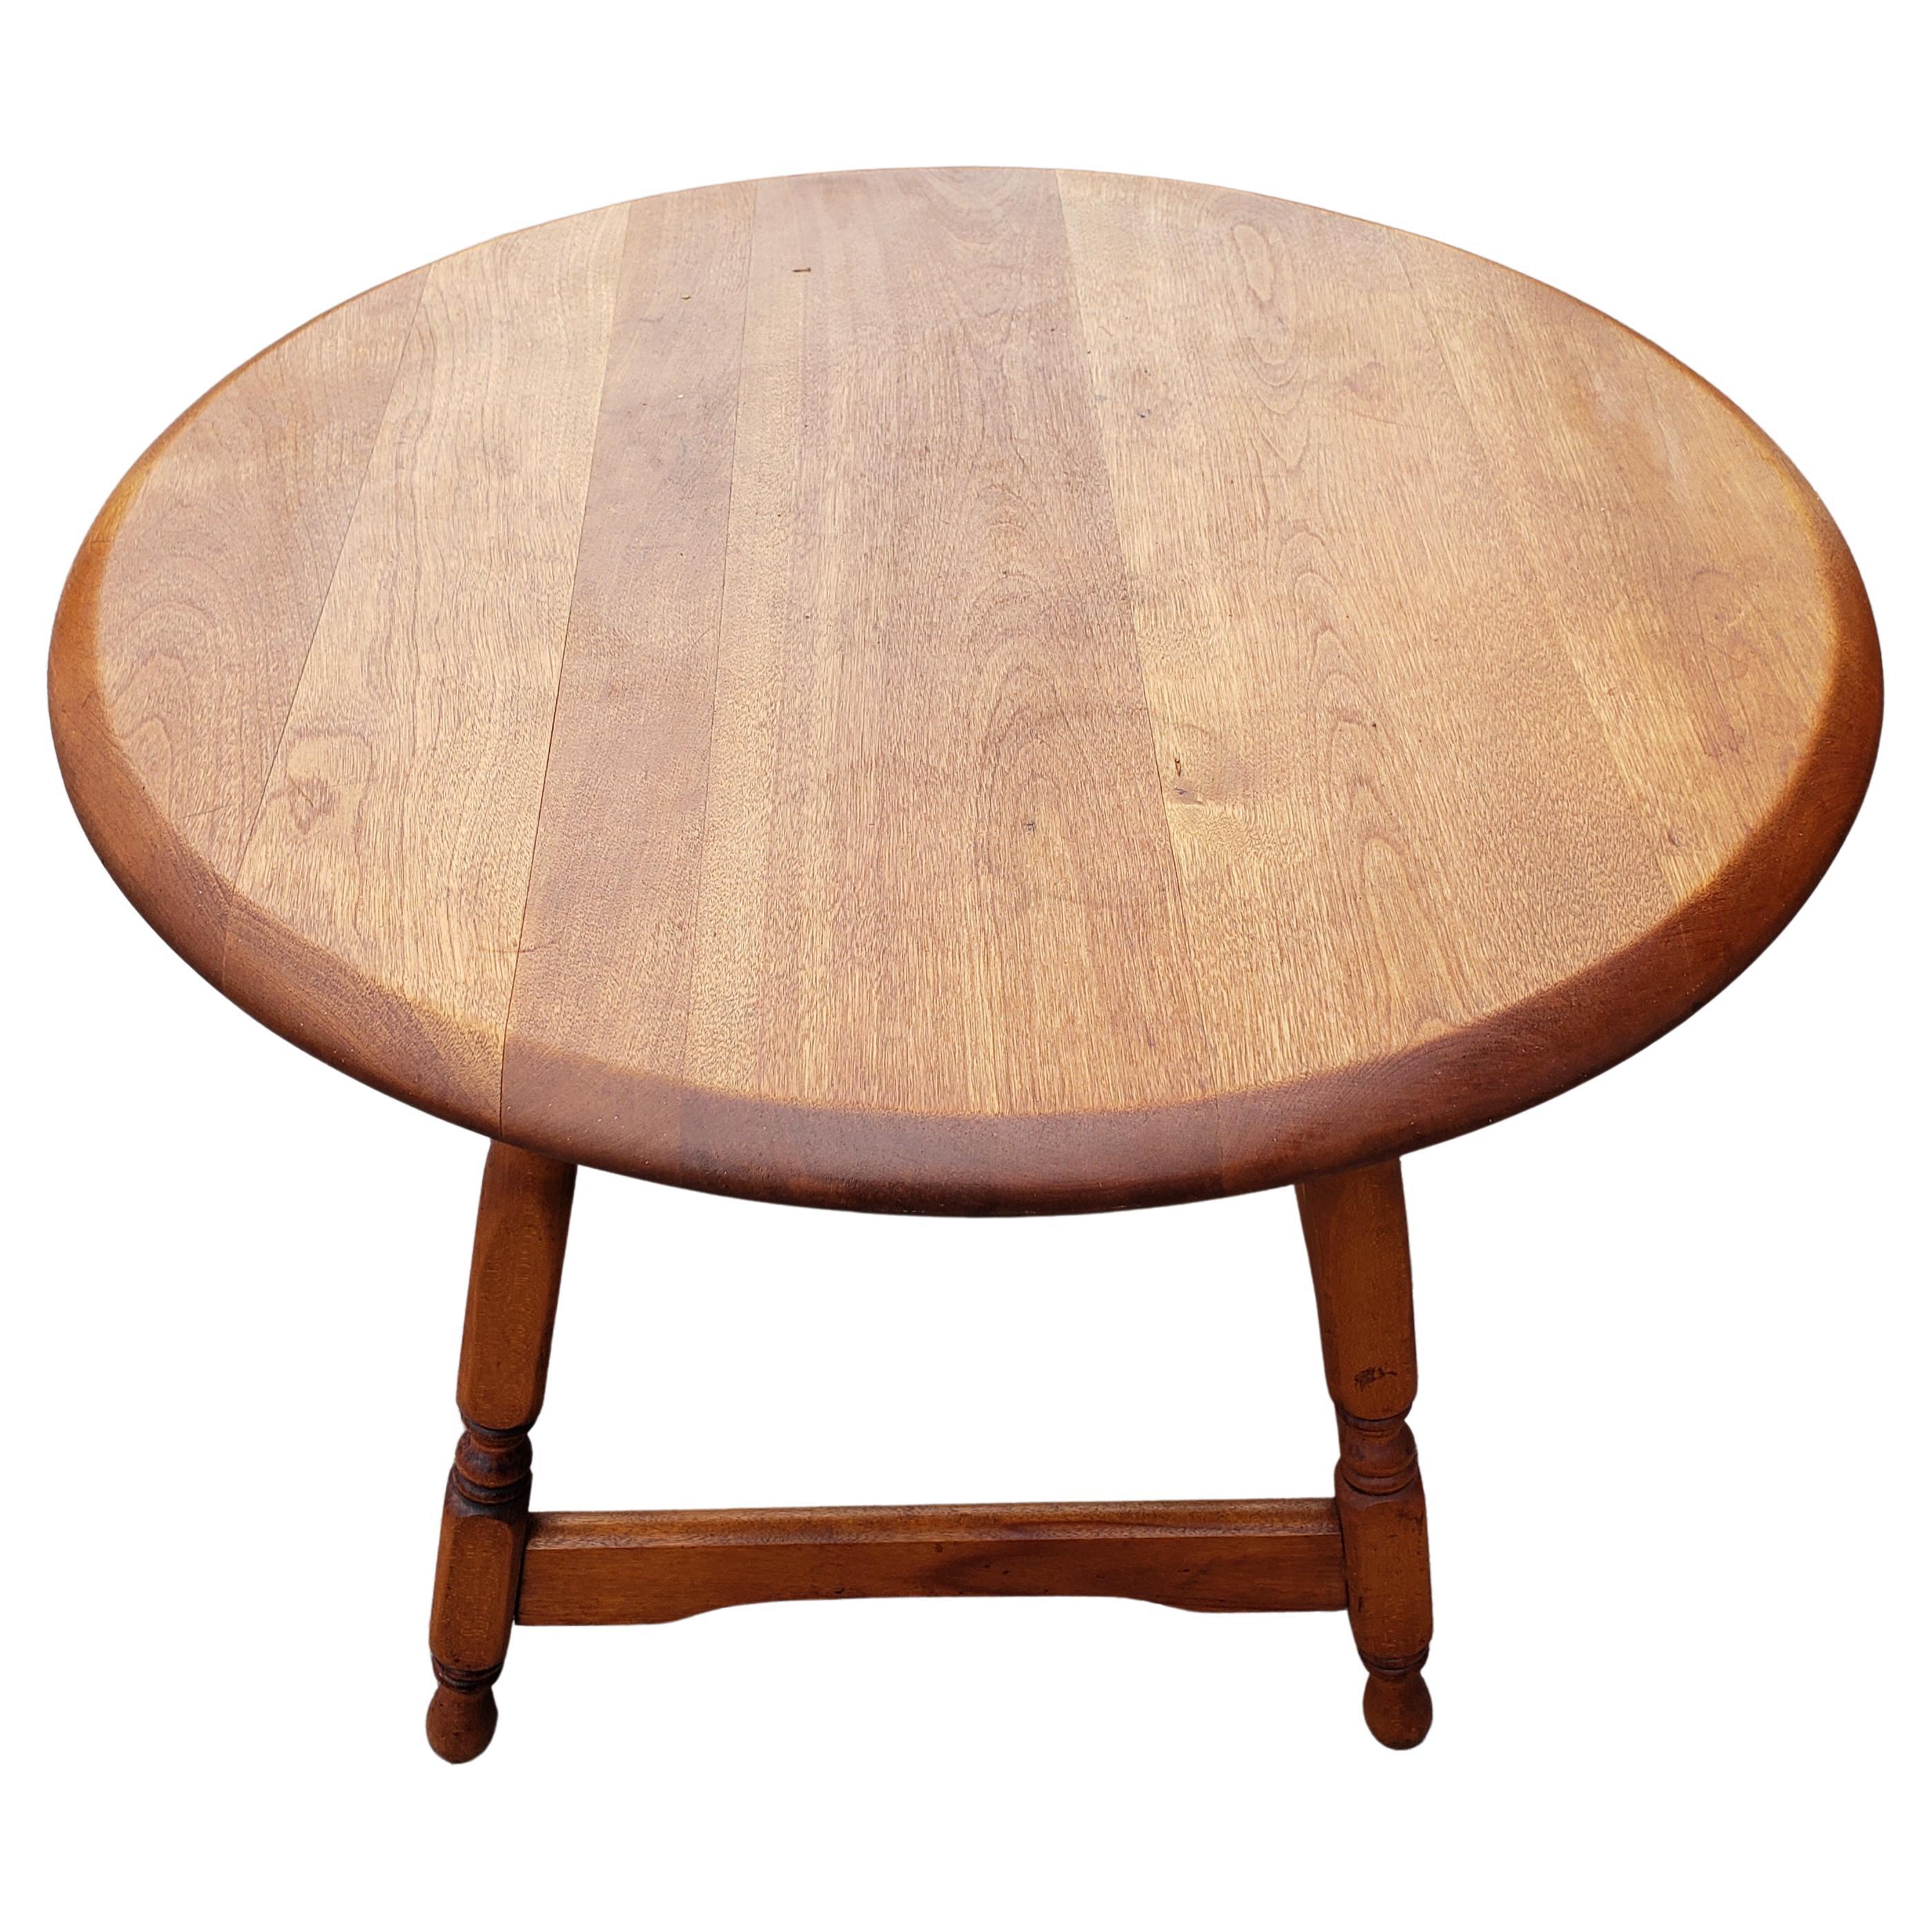 American Classical Amish Hand Crafted Solid Red Oak Desert Table Side Table, Circa 1970s For Sale